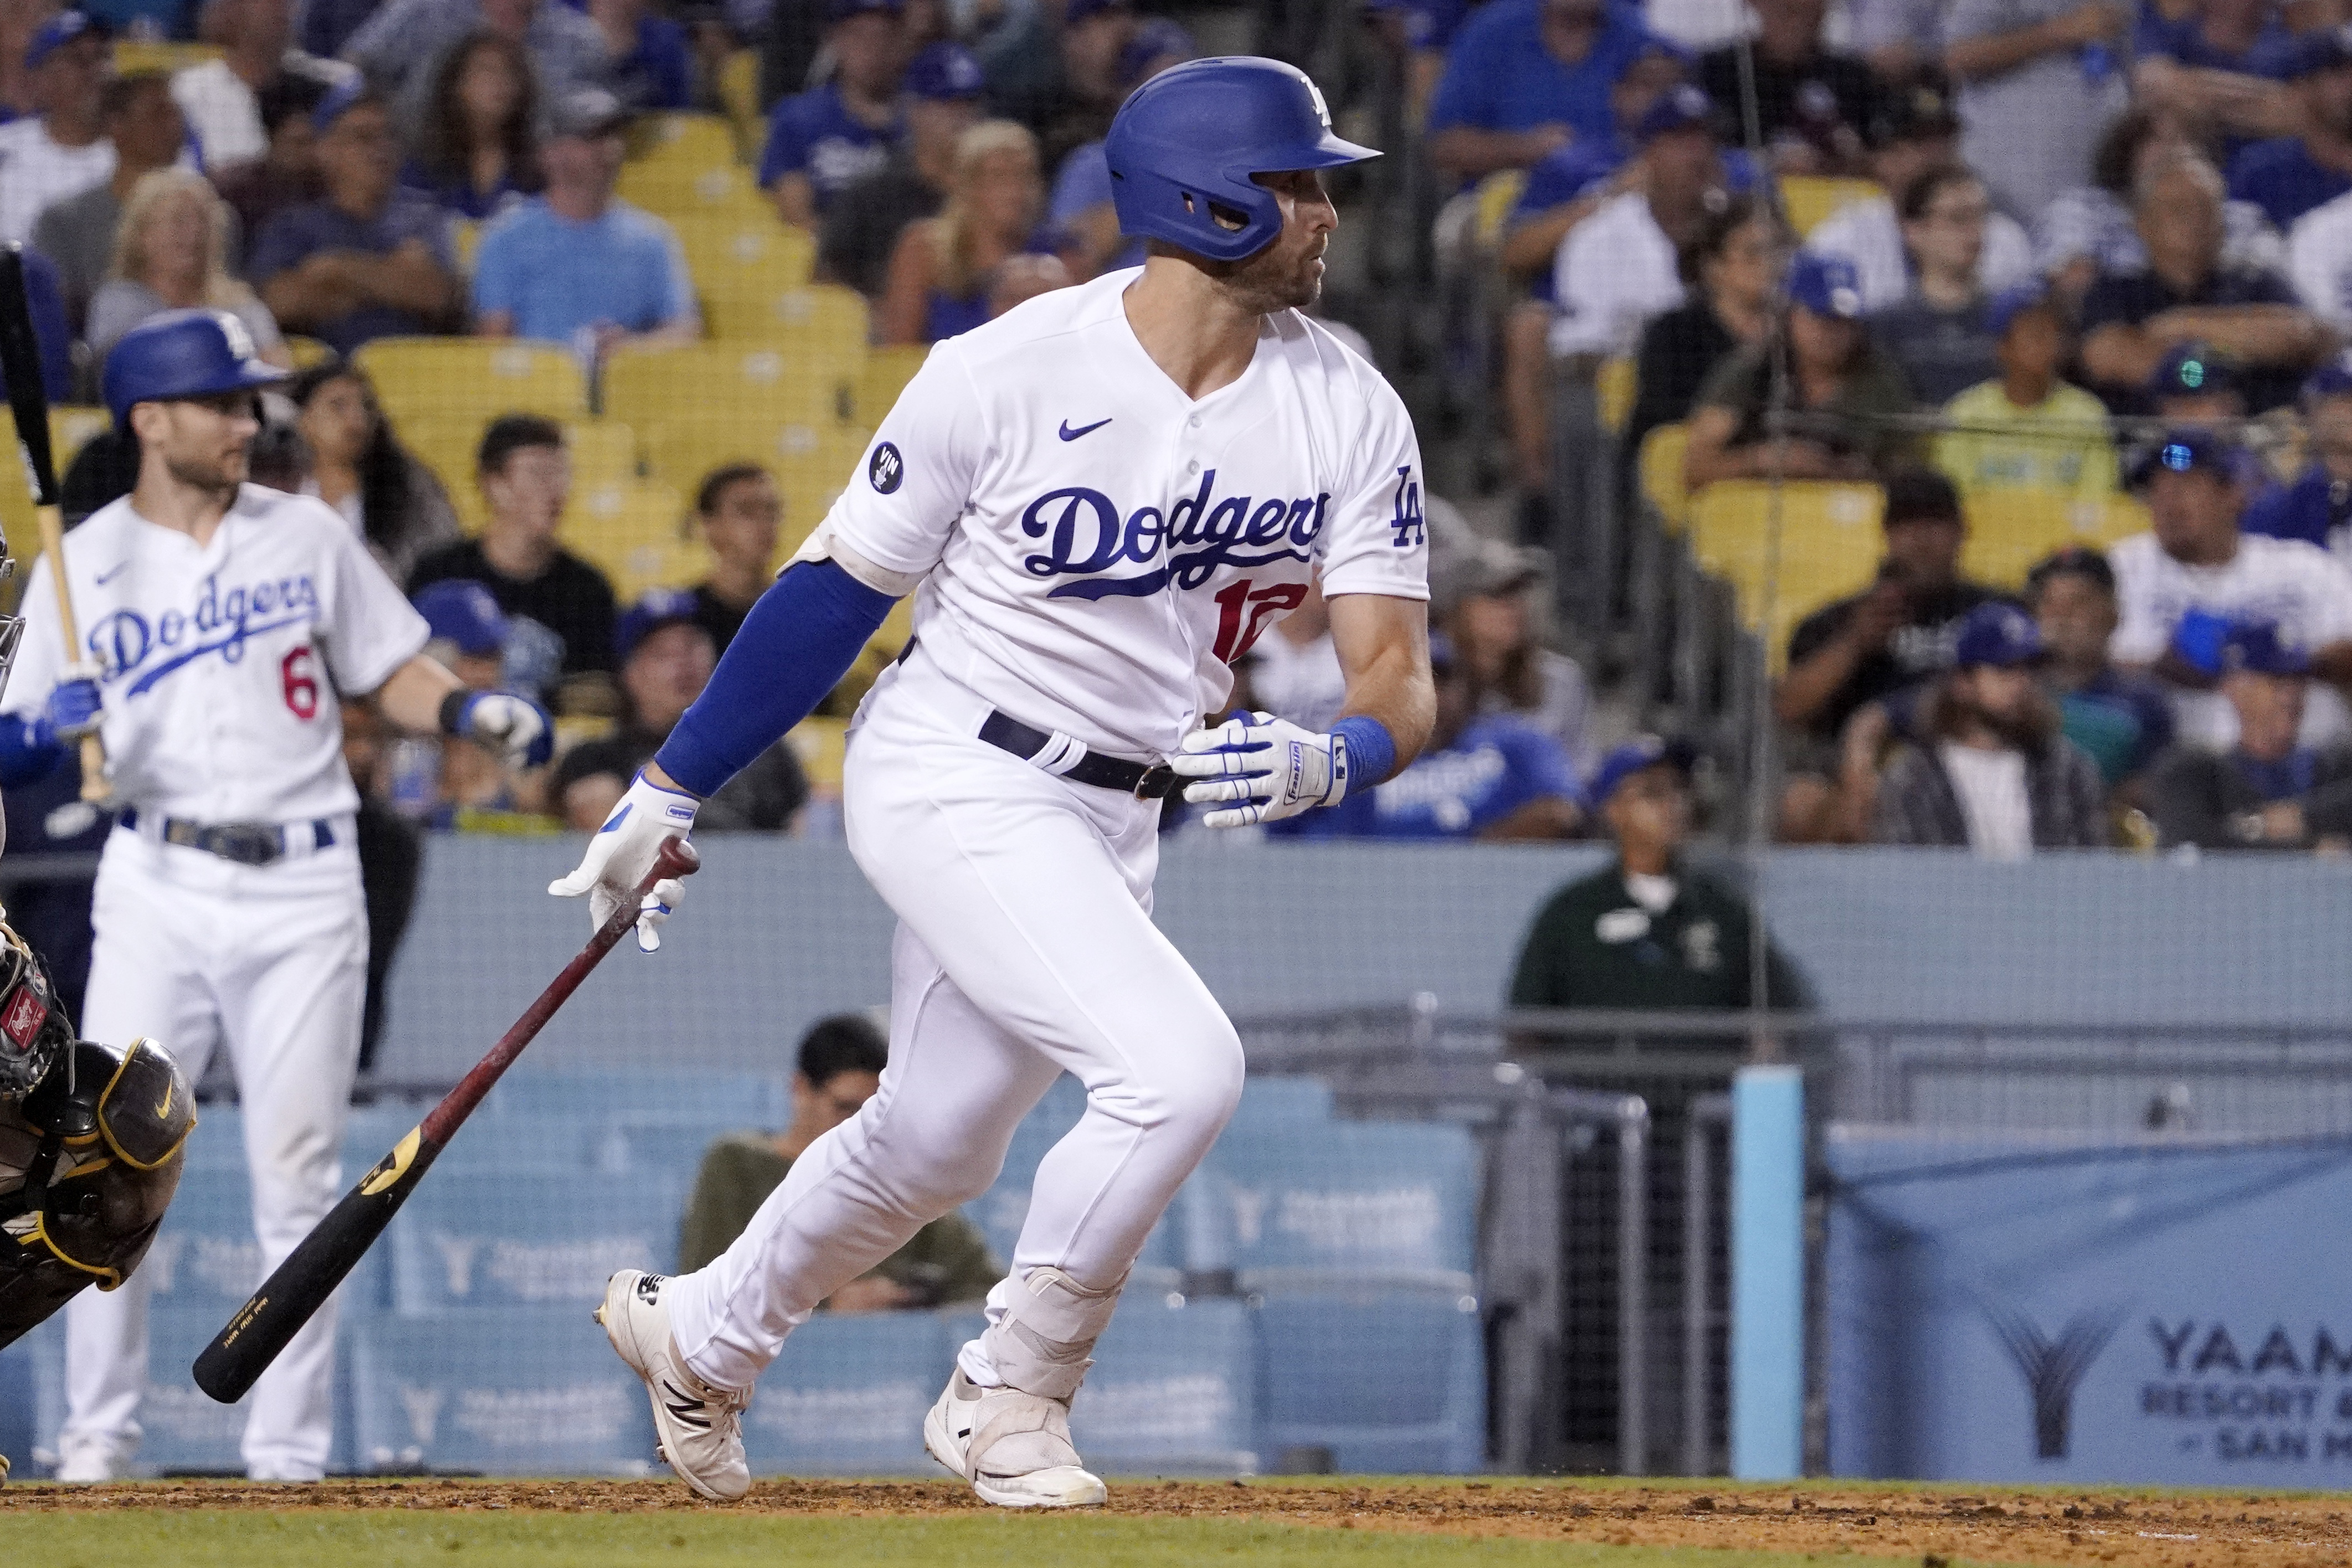 This Guy Earned the Boos…” – Broadcaster Takes a Dig at Joey Gallo  Following Yankees' Trade-Off With Dodgers - EssentiallySports